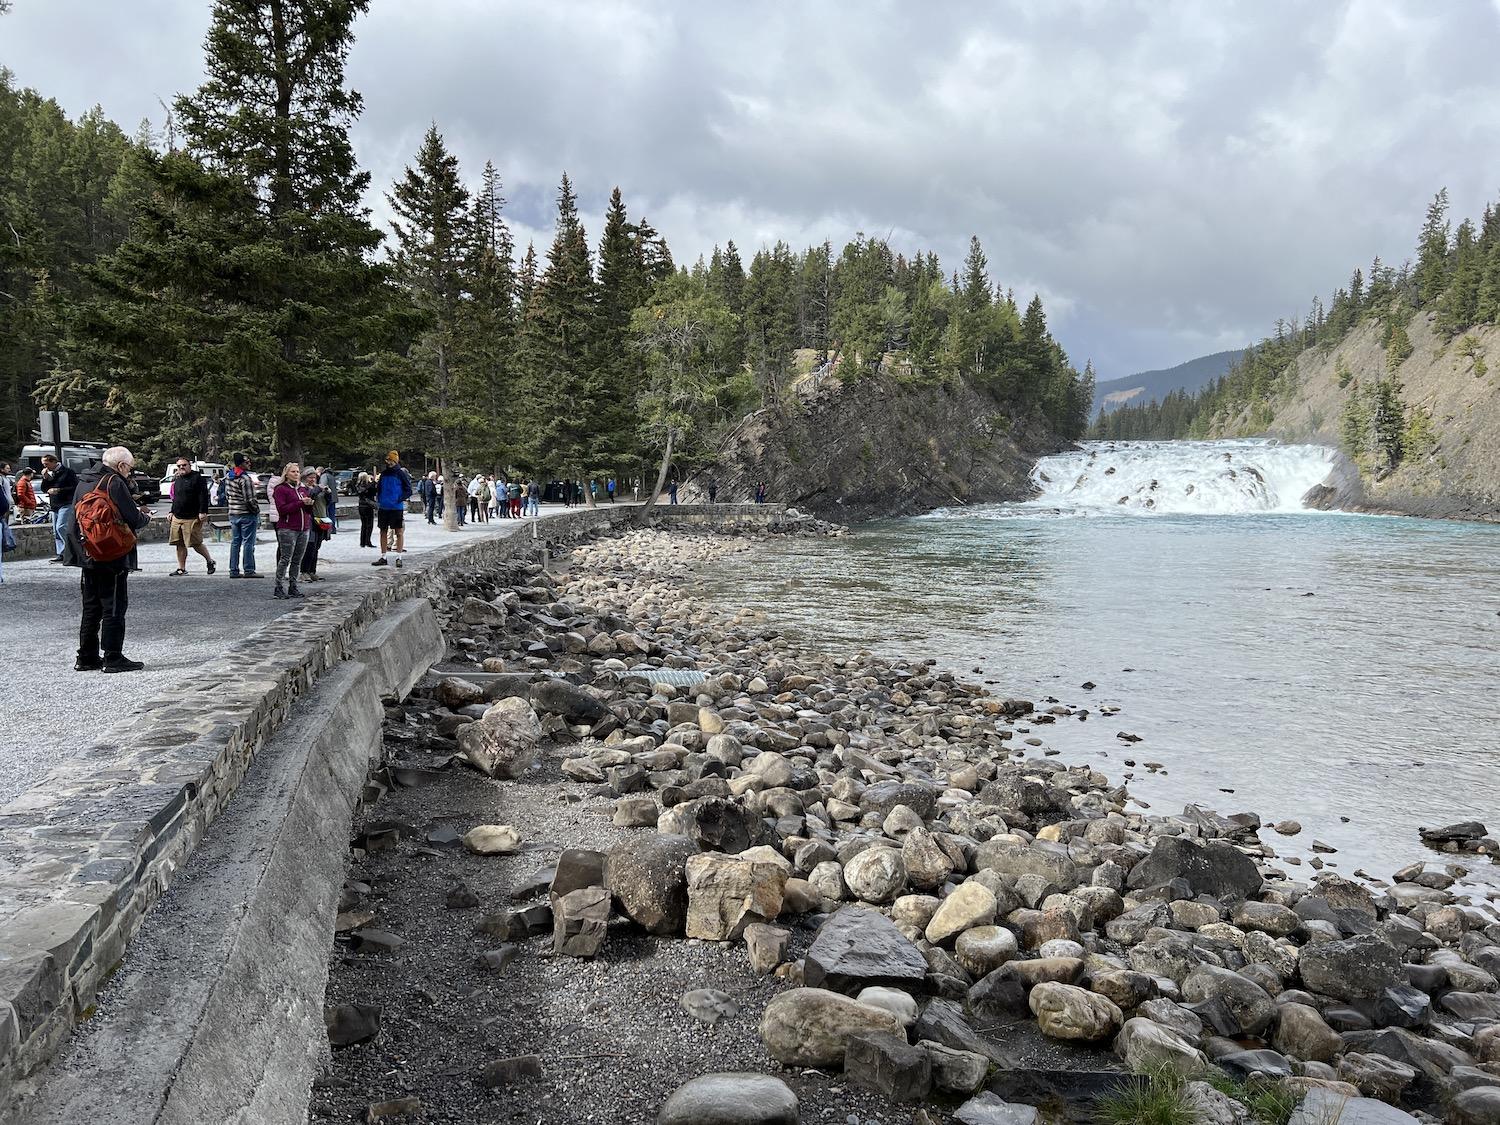 A crowd admires the Bow River in Banff National Park.